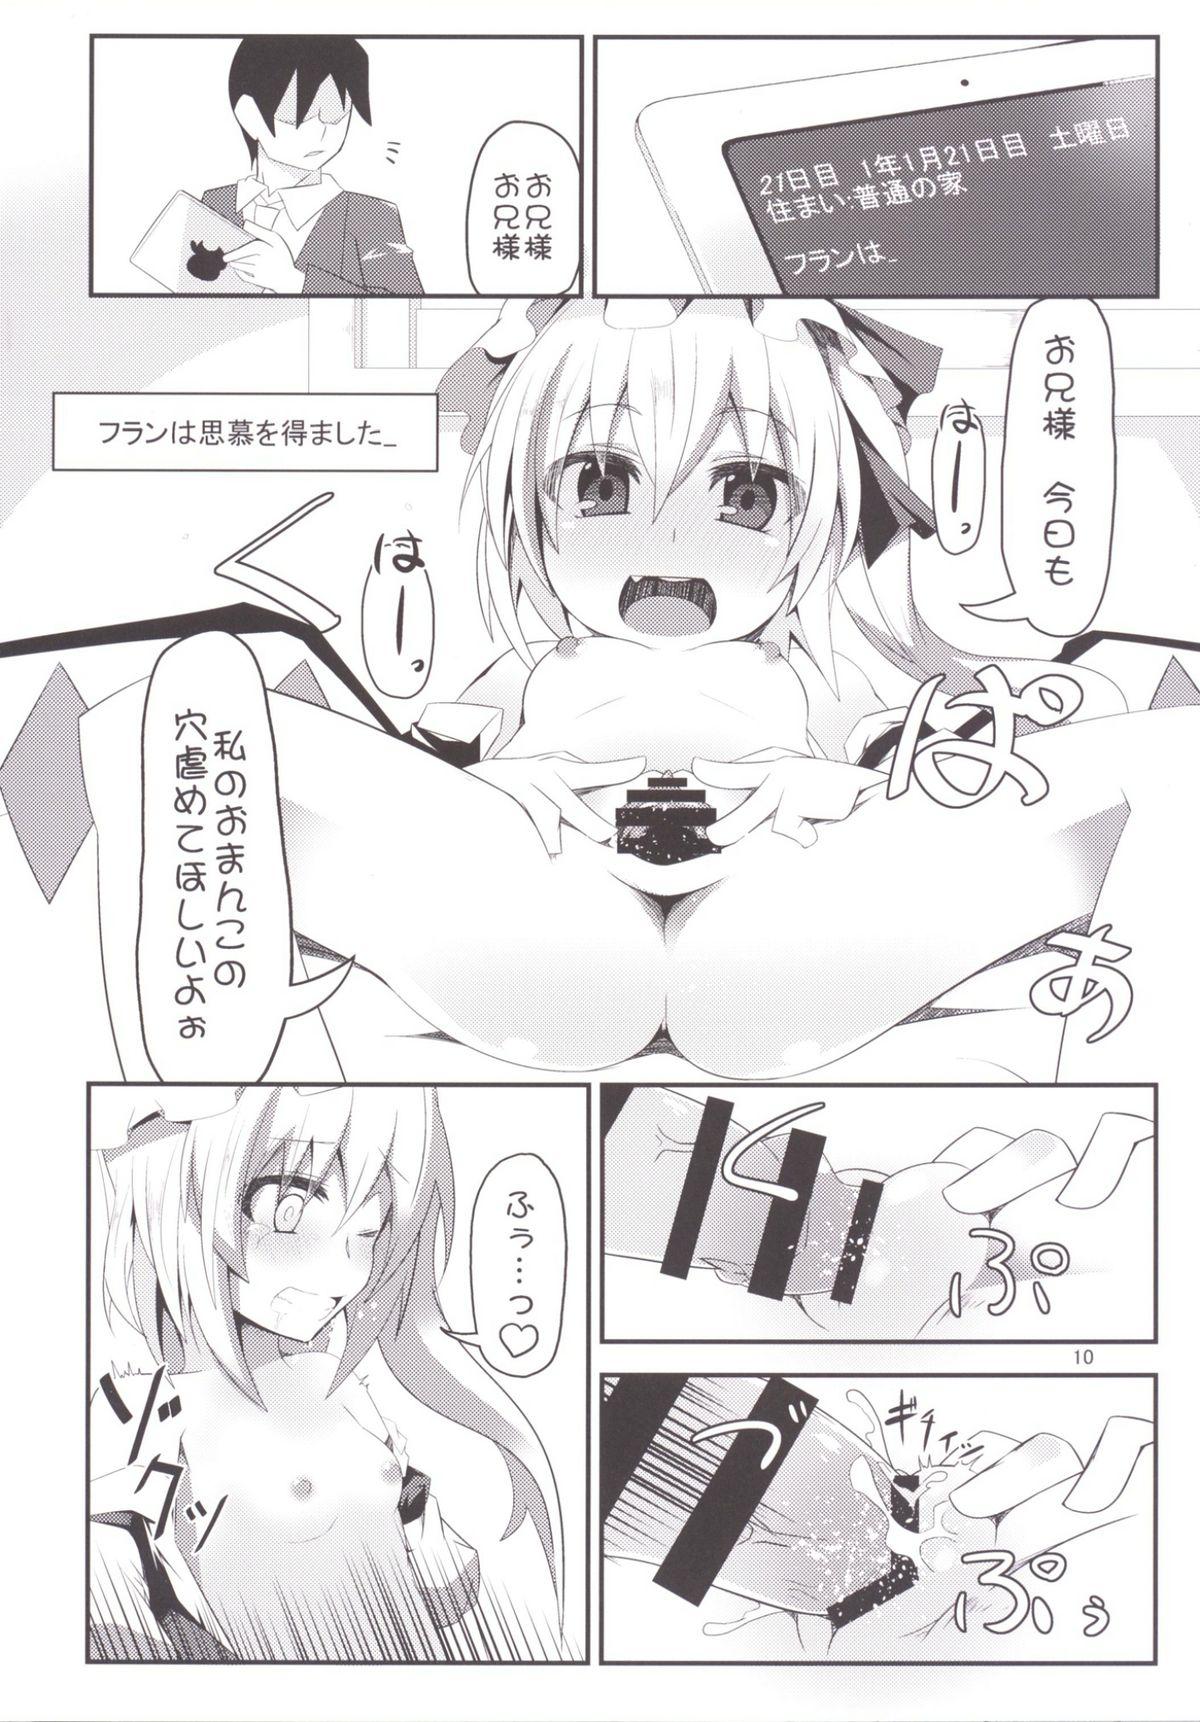 Lips er@Flan - Touhou project Domination - Page 10